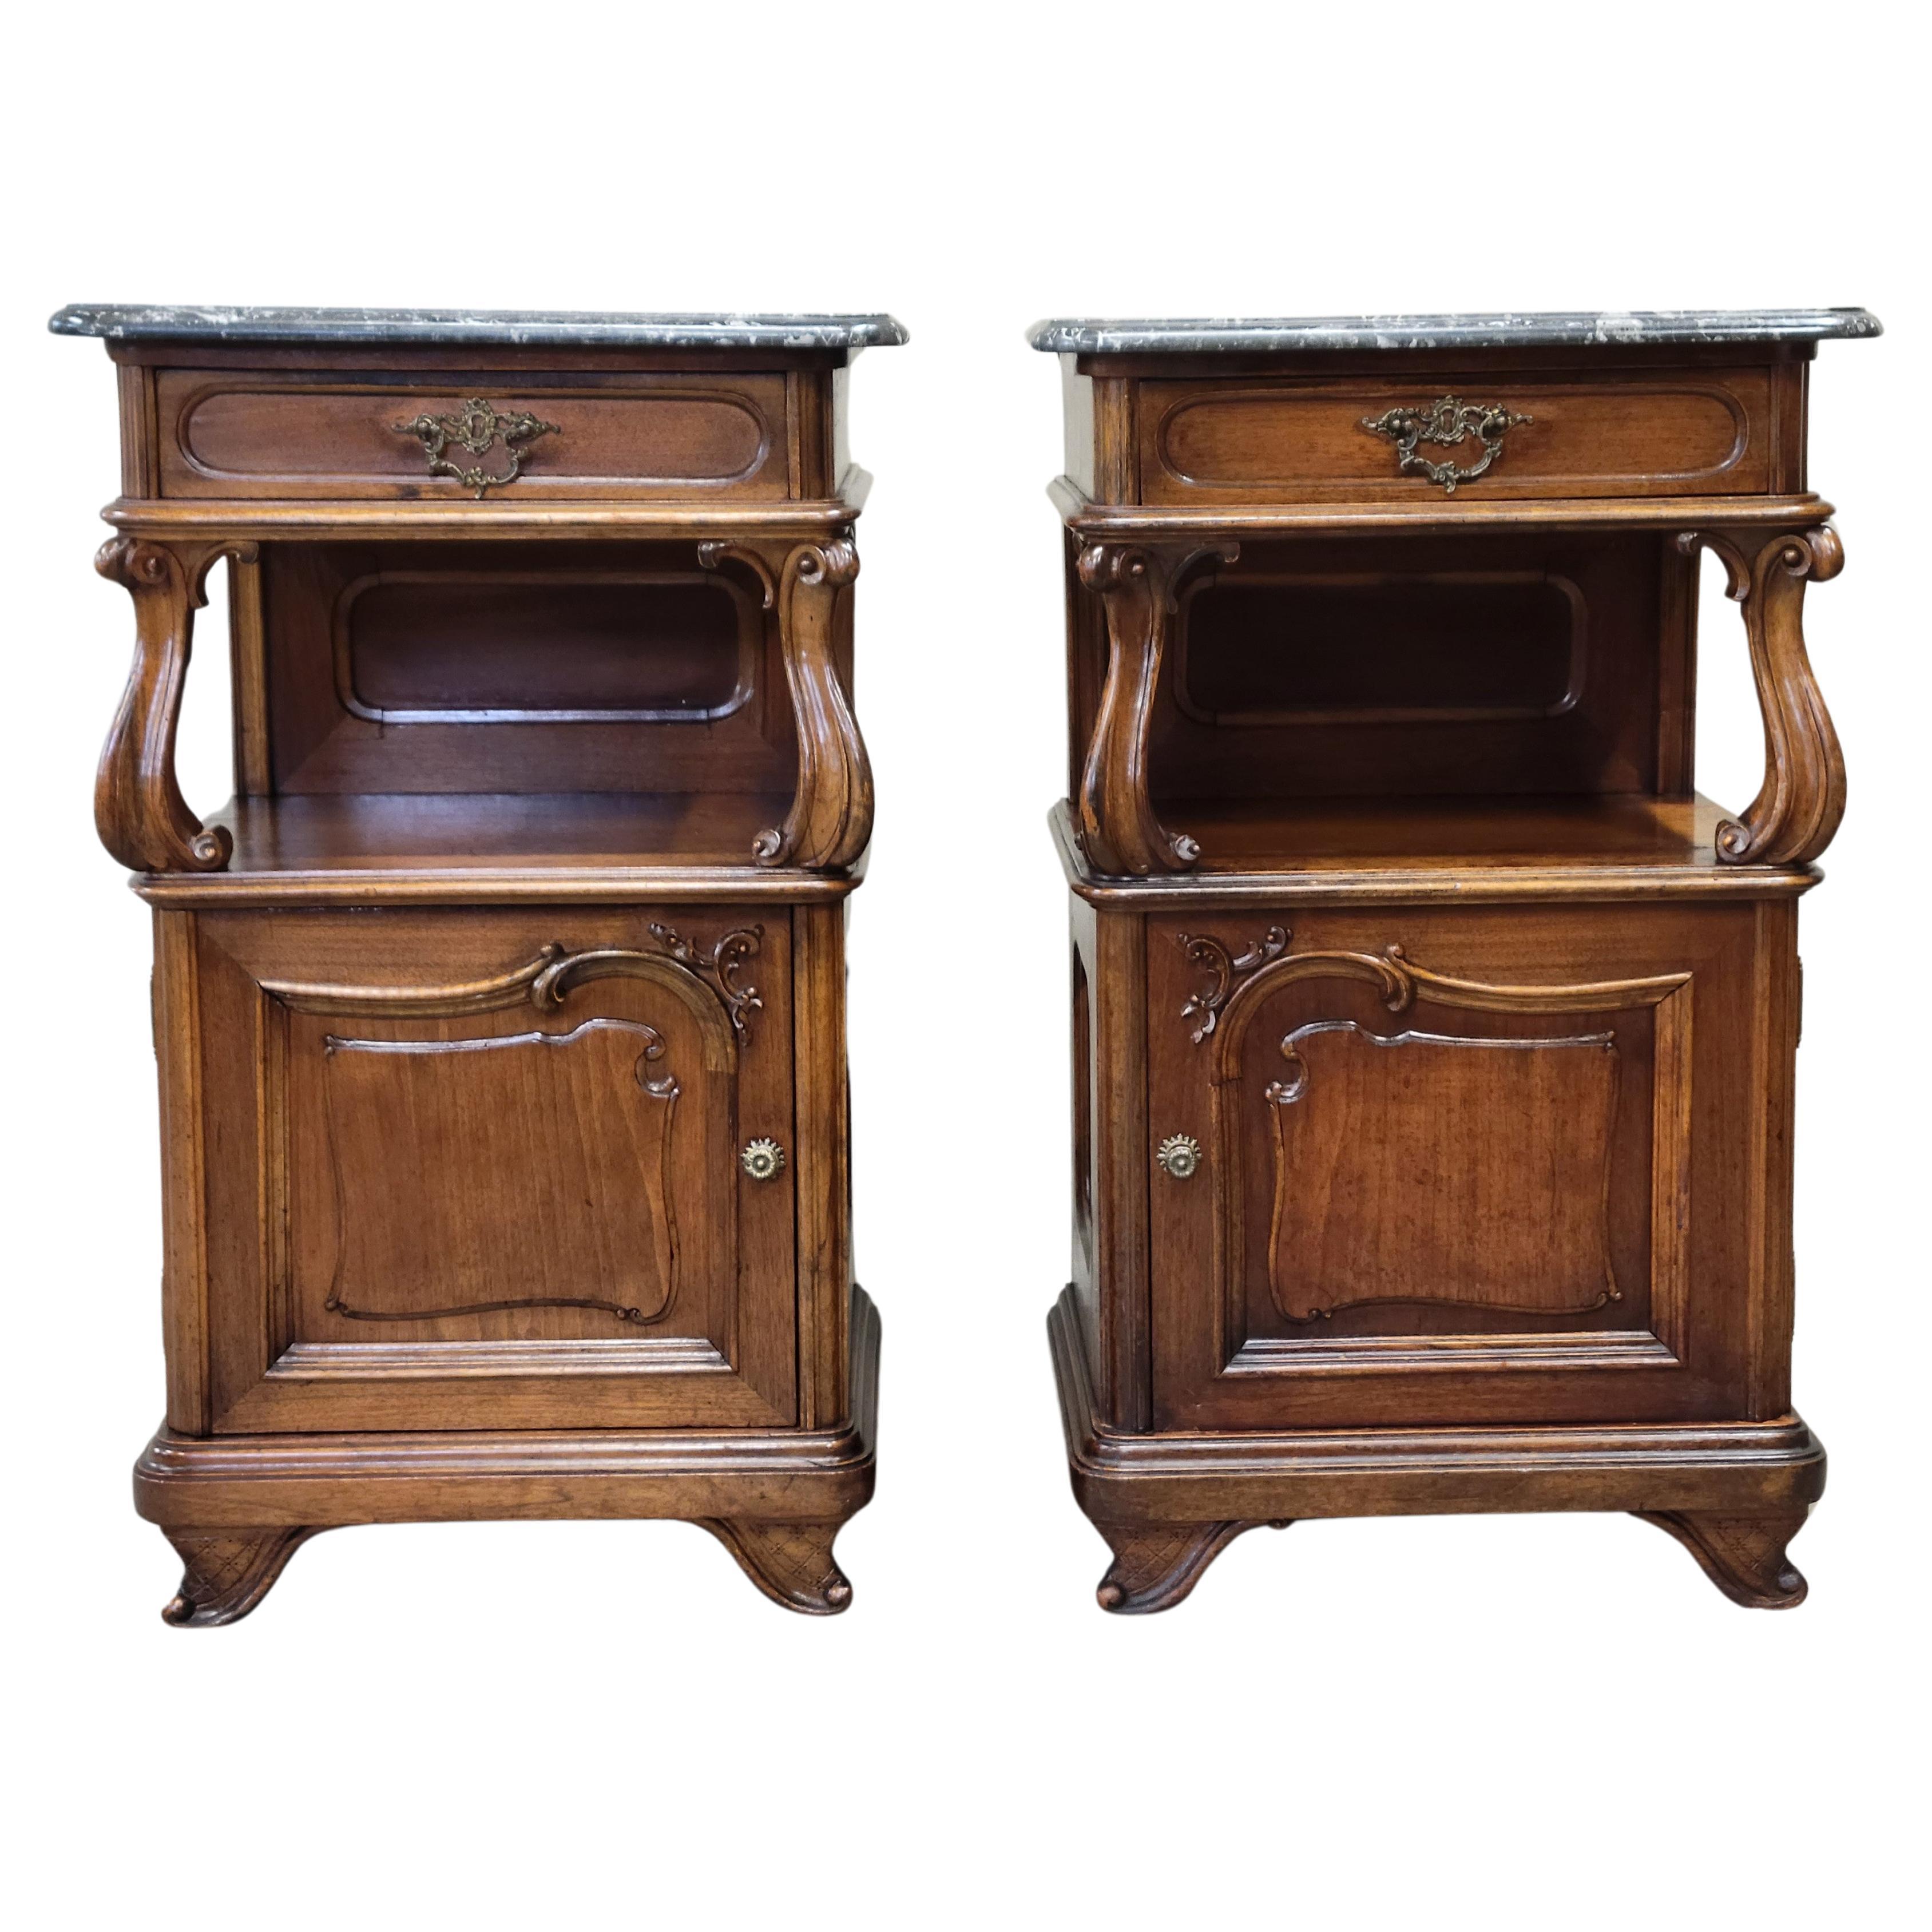 Antique Austrian Art Nouveau Walnut and Black Marble Top Nightstands - a Pair For Sale